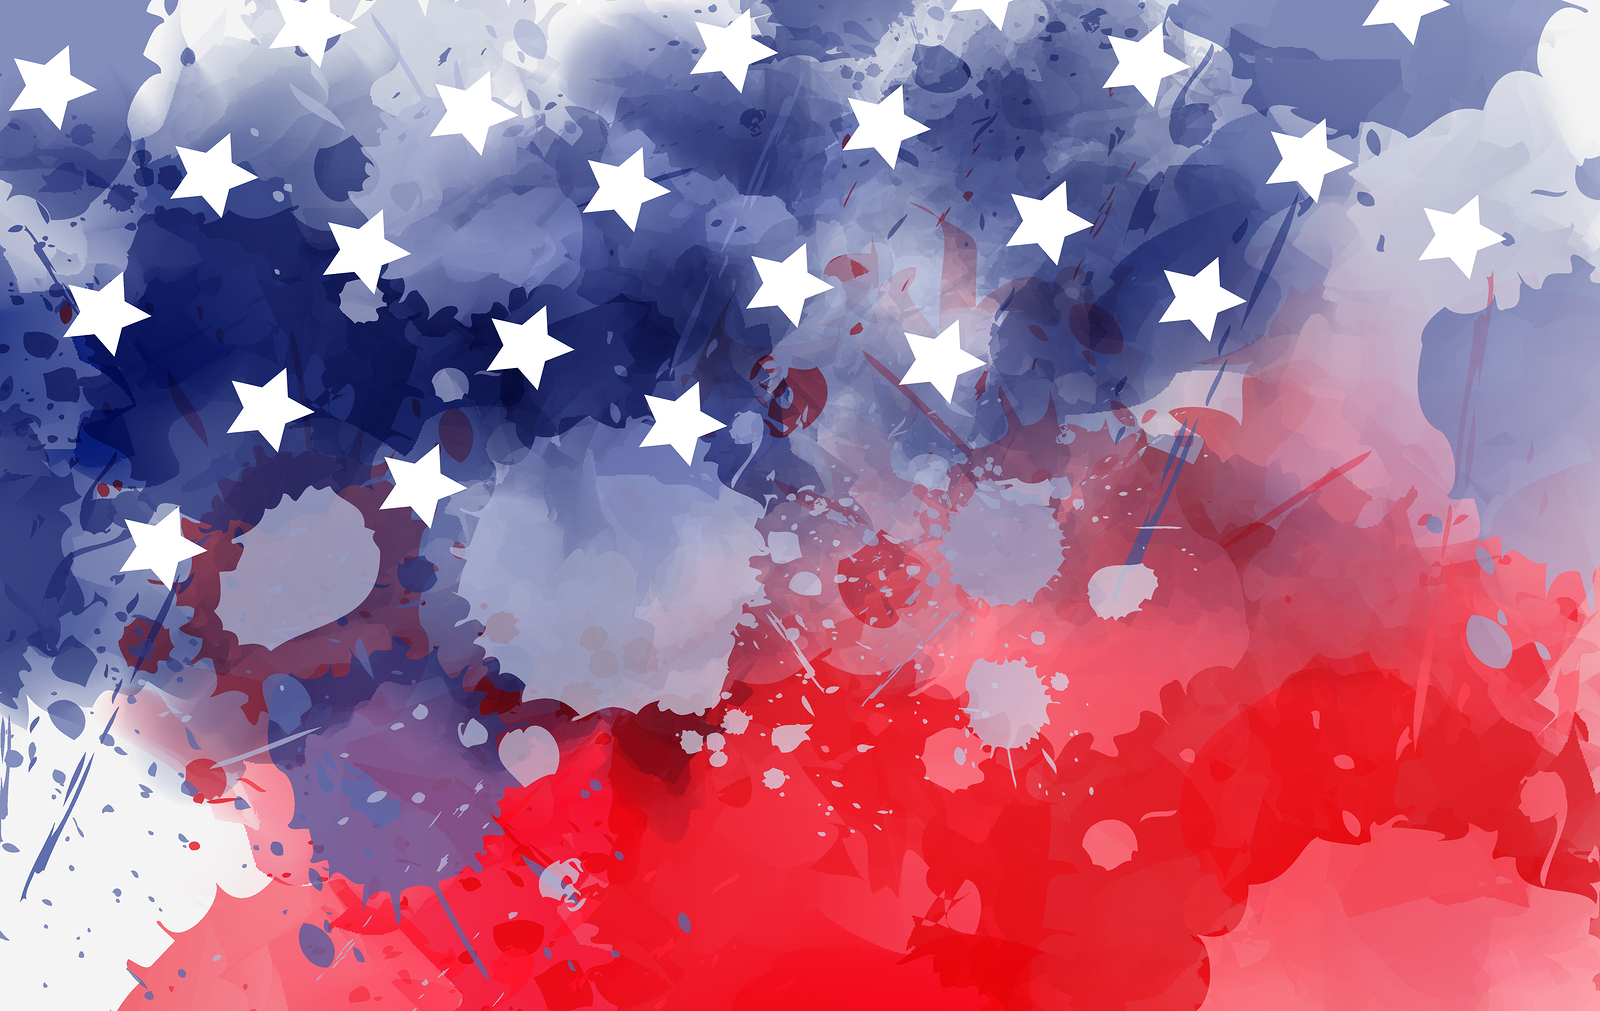 Abstract background banner with watercolor splashes in flag colors for USA. Template background for national holidays - Independence day, Memorial day, Labor day etc. Blue and red colored with stars.